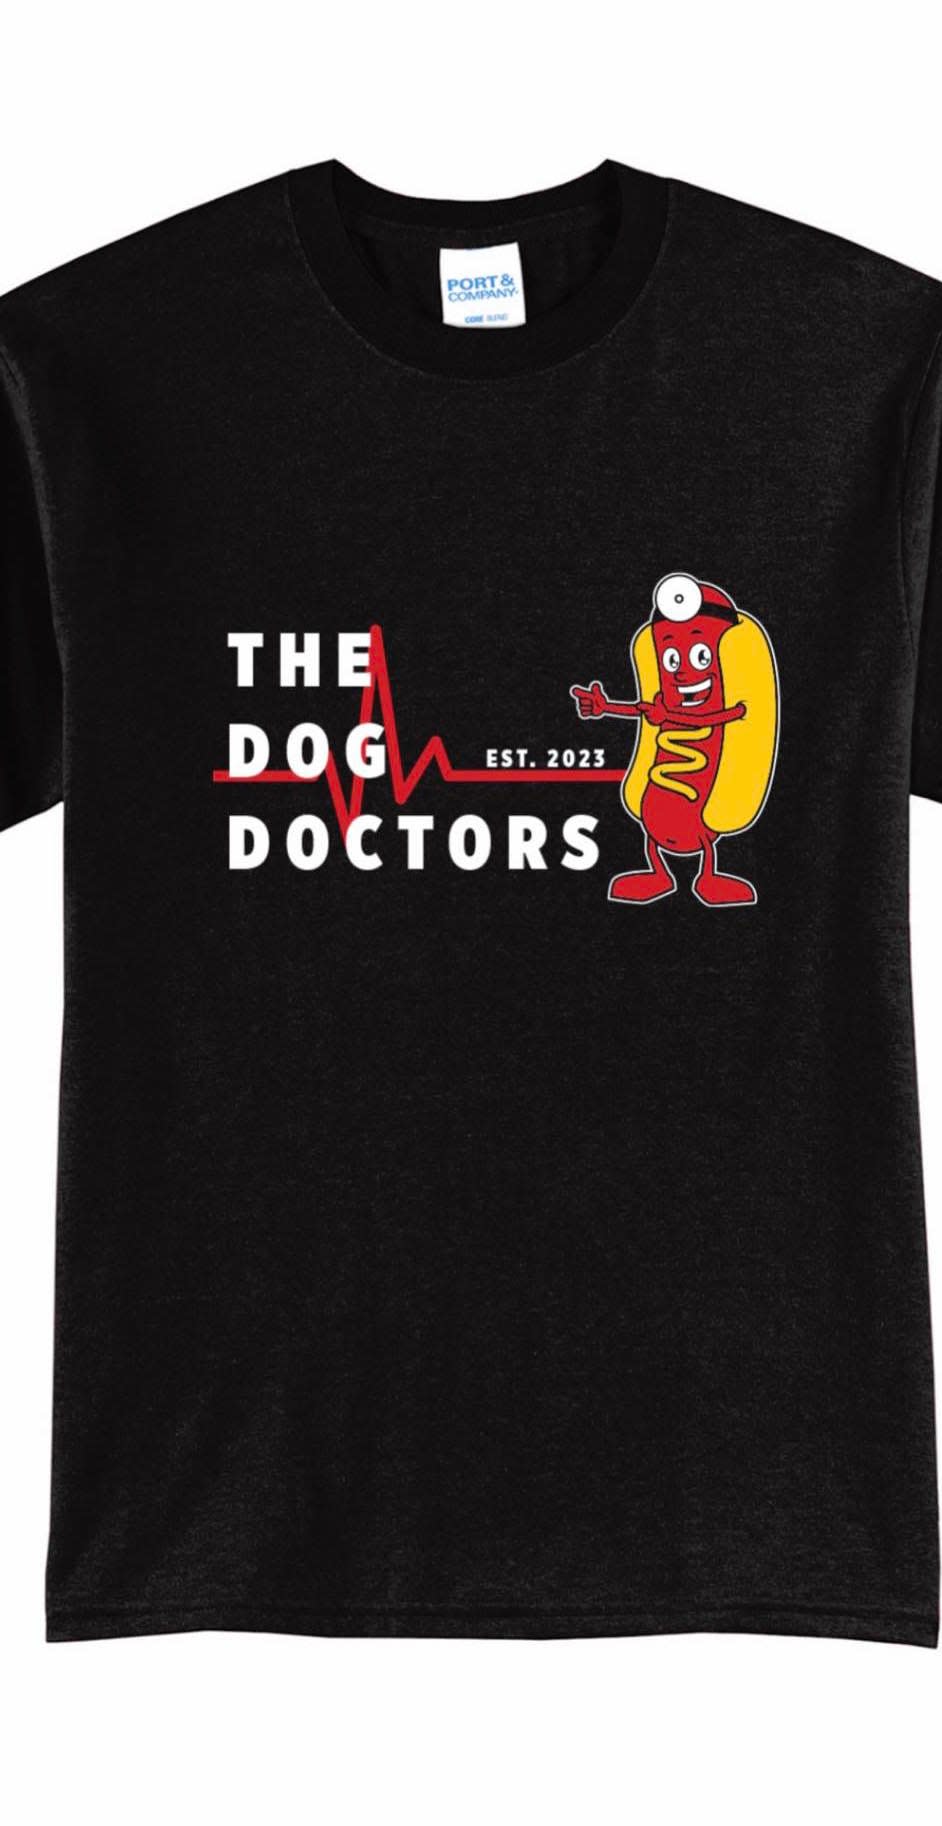 “The Dog Doctors” will offer shirts, hoodies, crew neck sweatshirts and New Era hats soon.